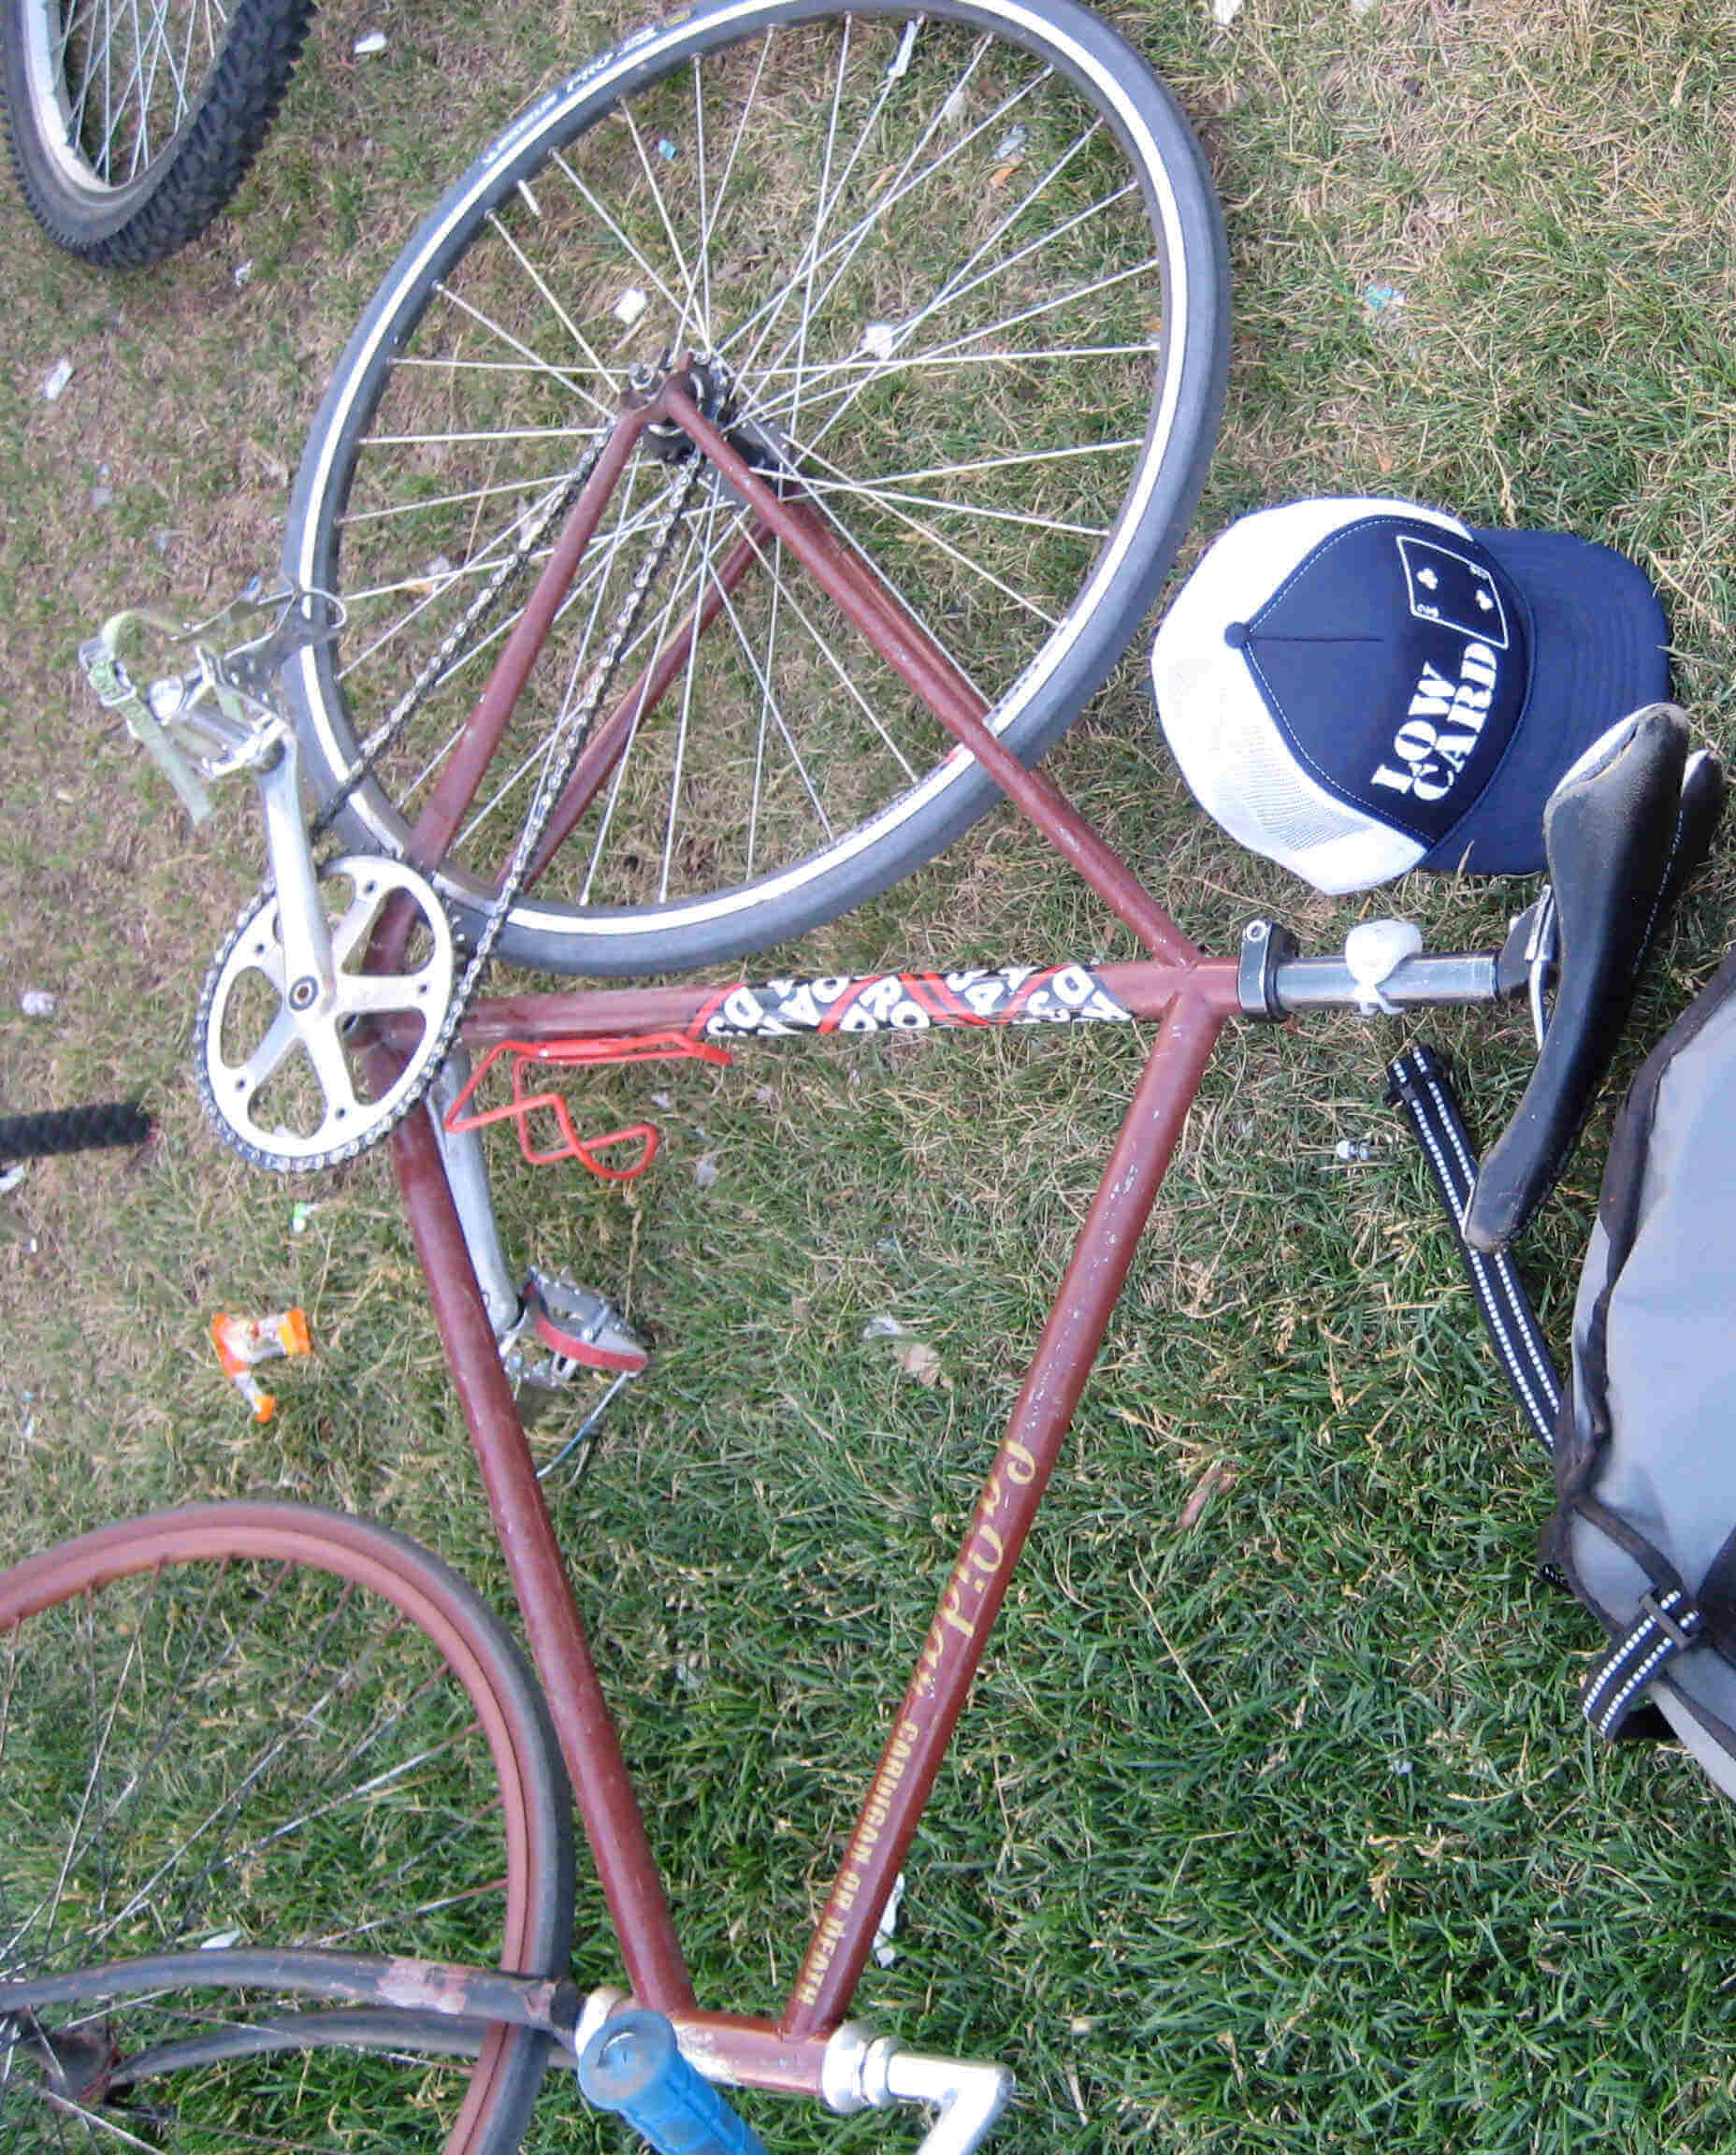 Downward view of brown Surly Steamroller bike, laying on it's left side vertically in the grass